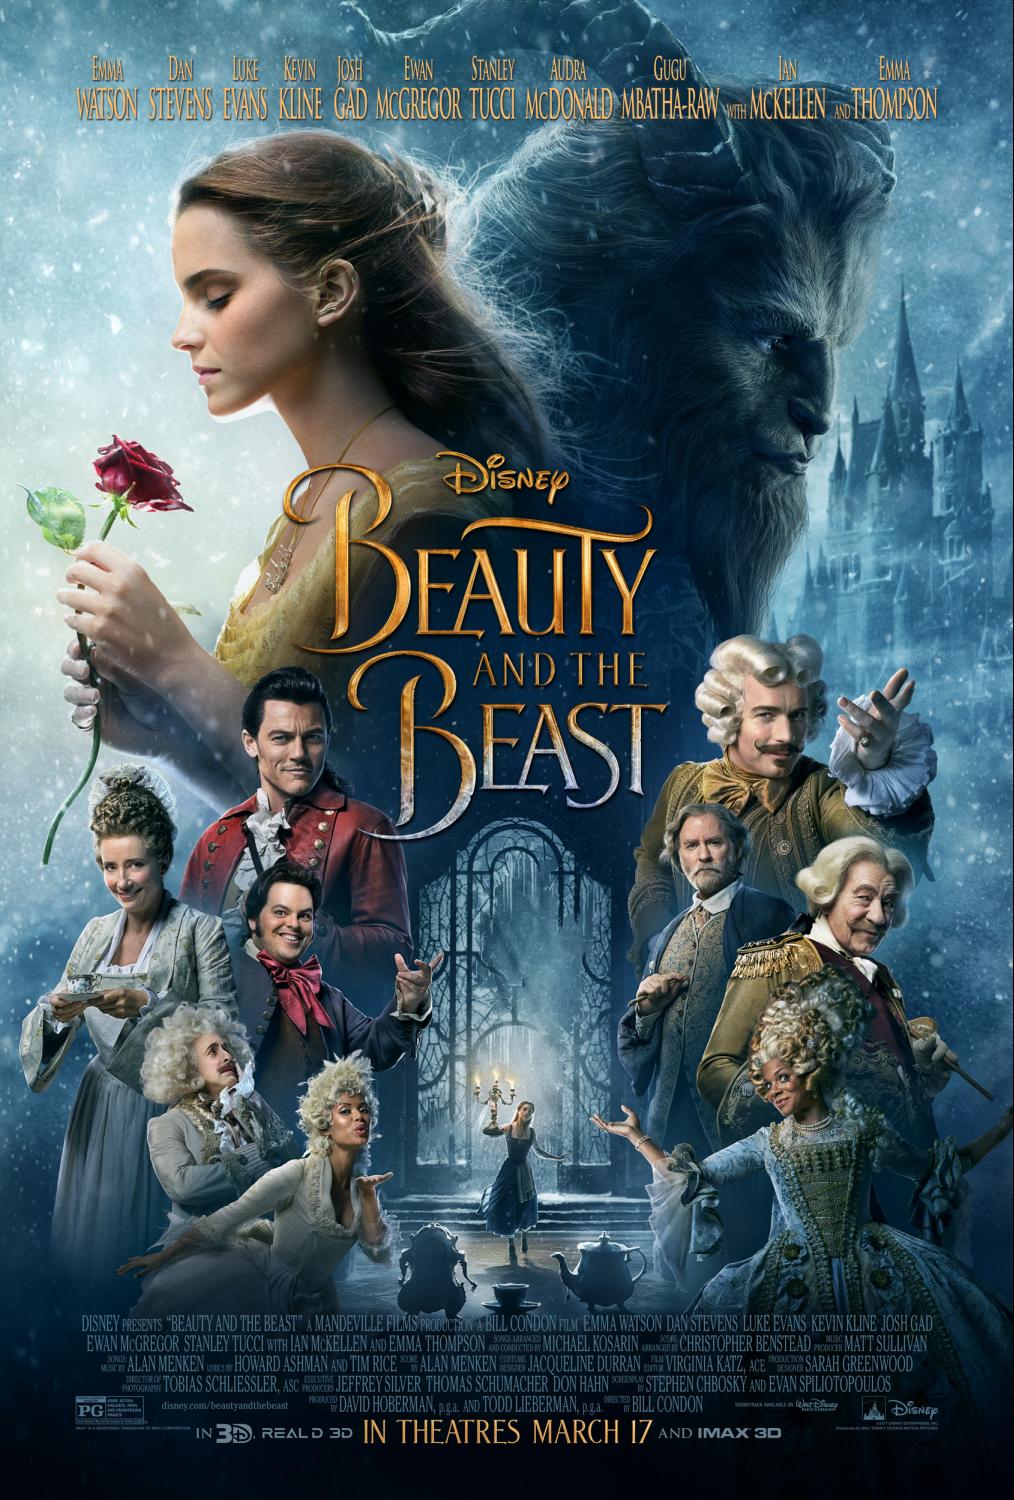 New TV spot and Poster from Disney’s Beauty and the Beast